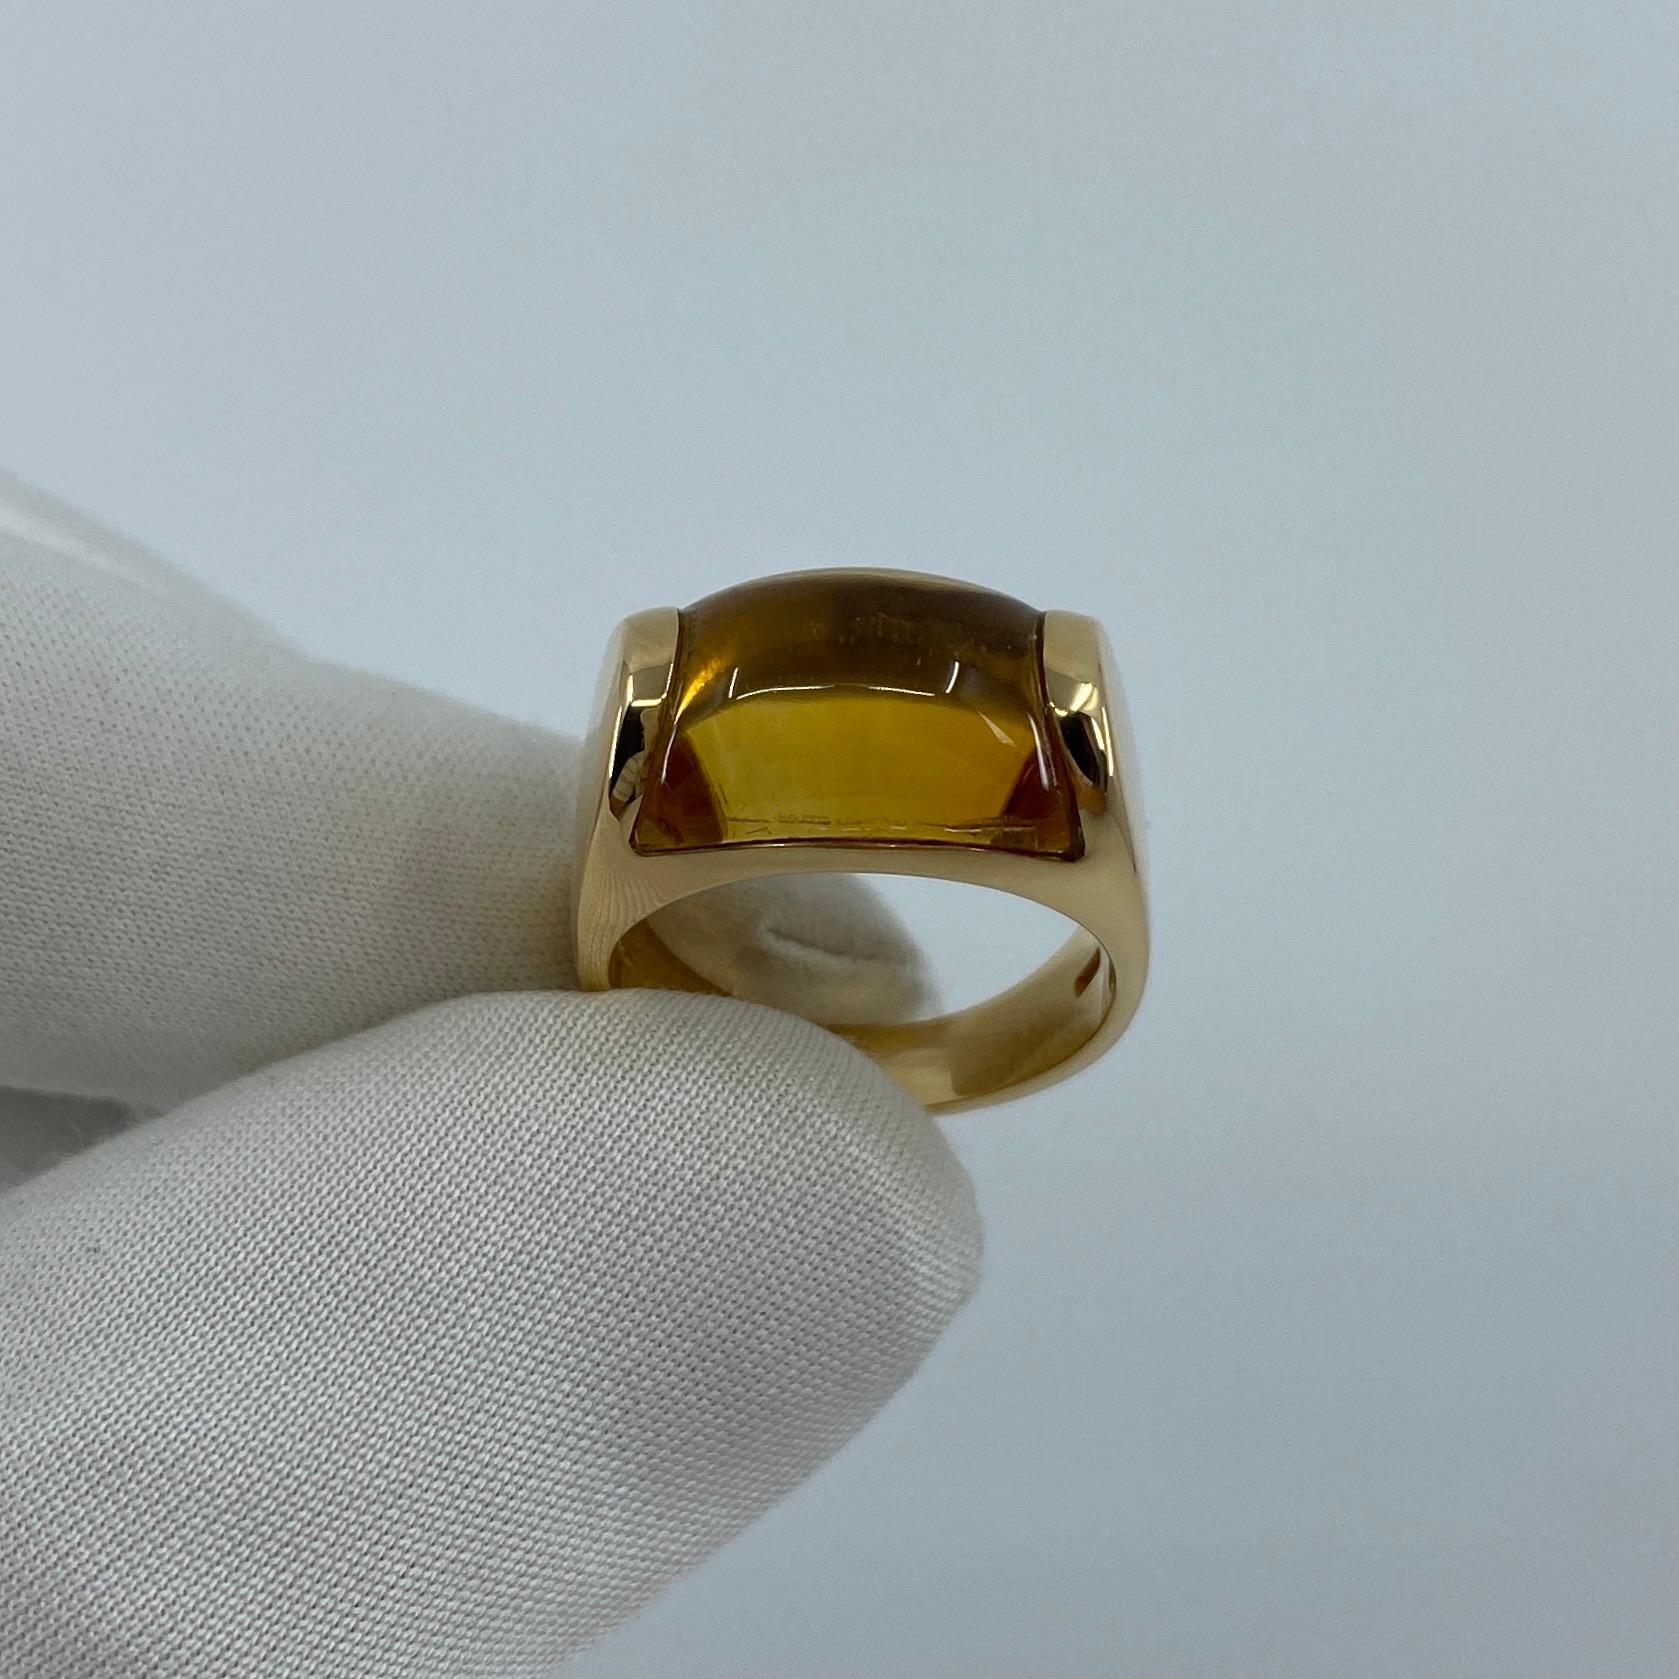 Rare Bvlgari Vivid Yellow Citrine Tronchetto 18k Yellow Gold Ring.

Beautiful domed yellow citrine set in a fine 18k yellow gold tension set ring.

In excellent condition, has been professionally polished and cleaned.

Ring size: UK K -US